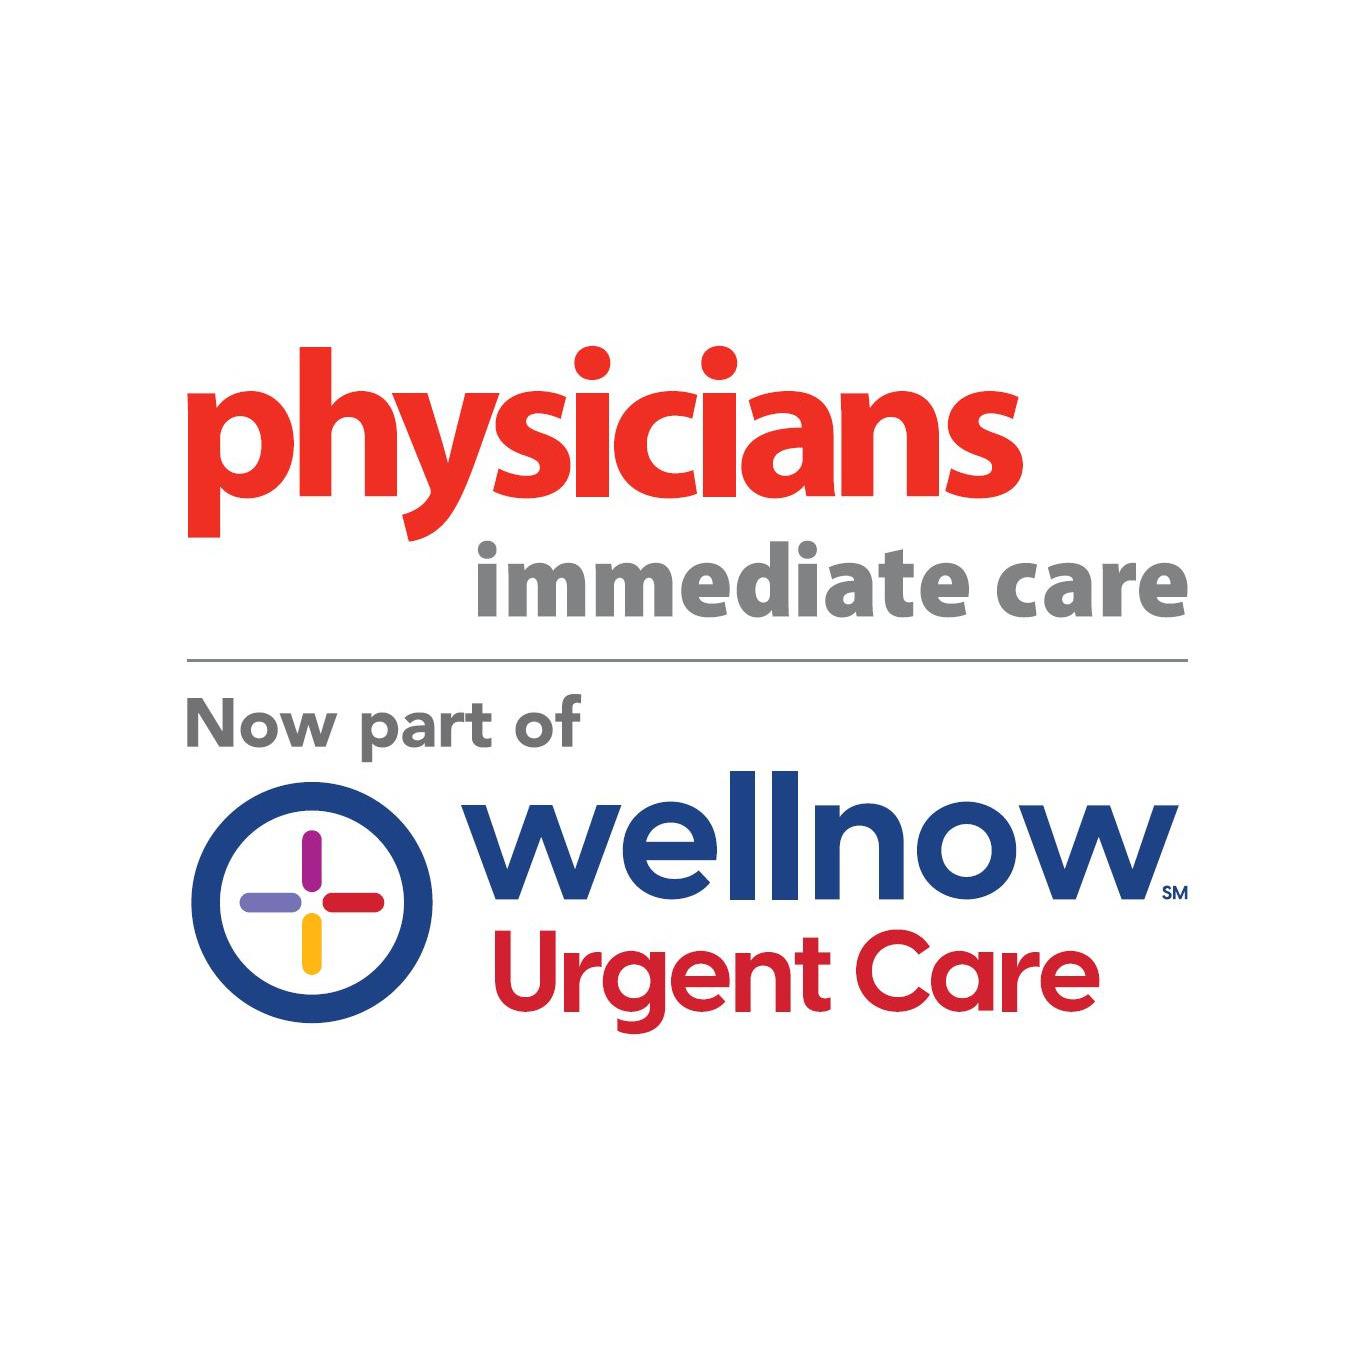 Physicians Urgent Care - South Bend, IN 46614 - (574)312-7022 | ShowMeLocal.com